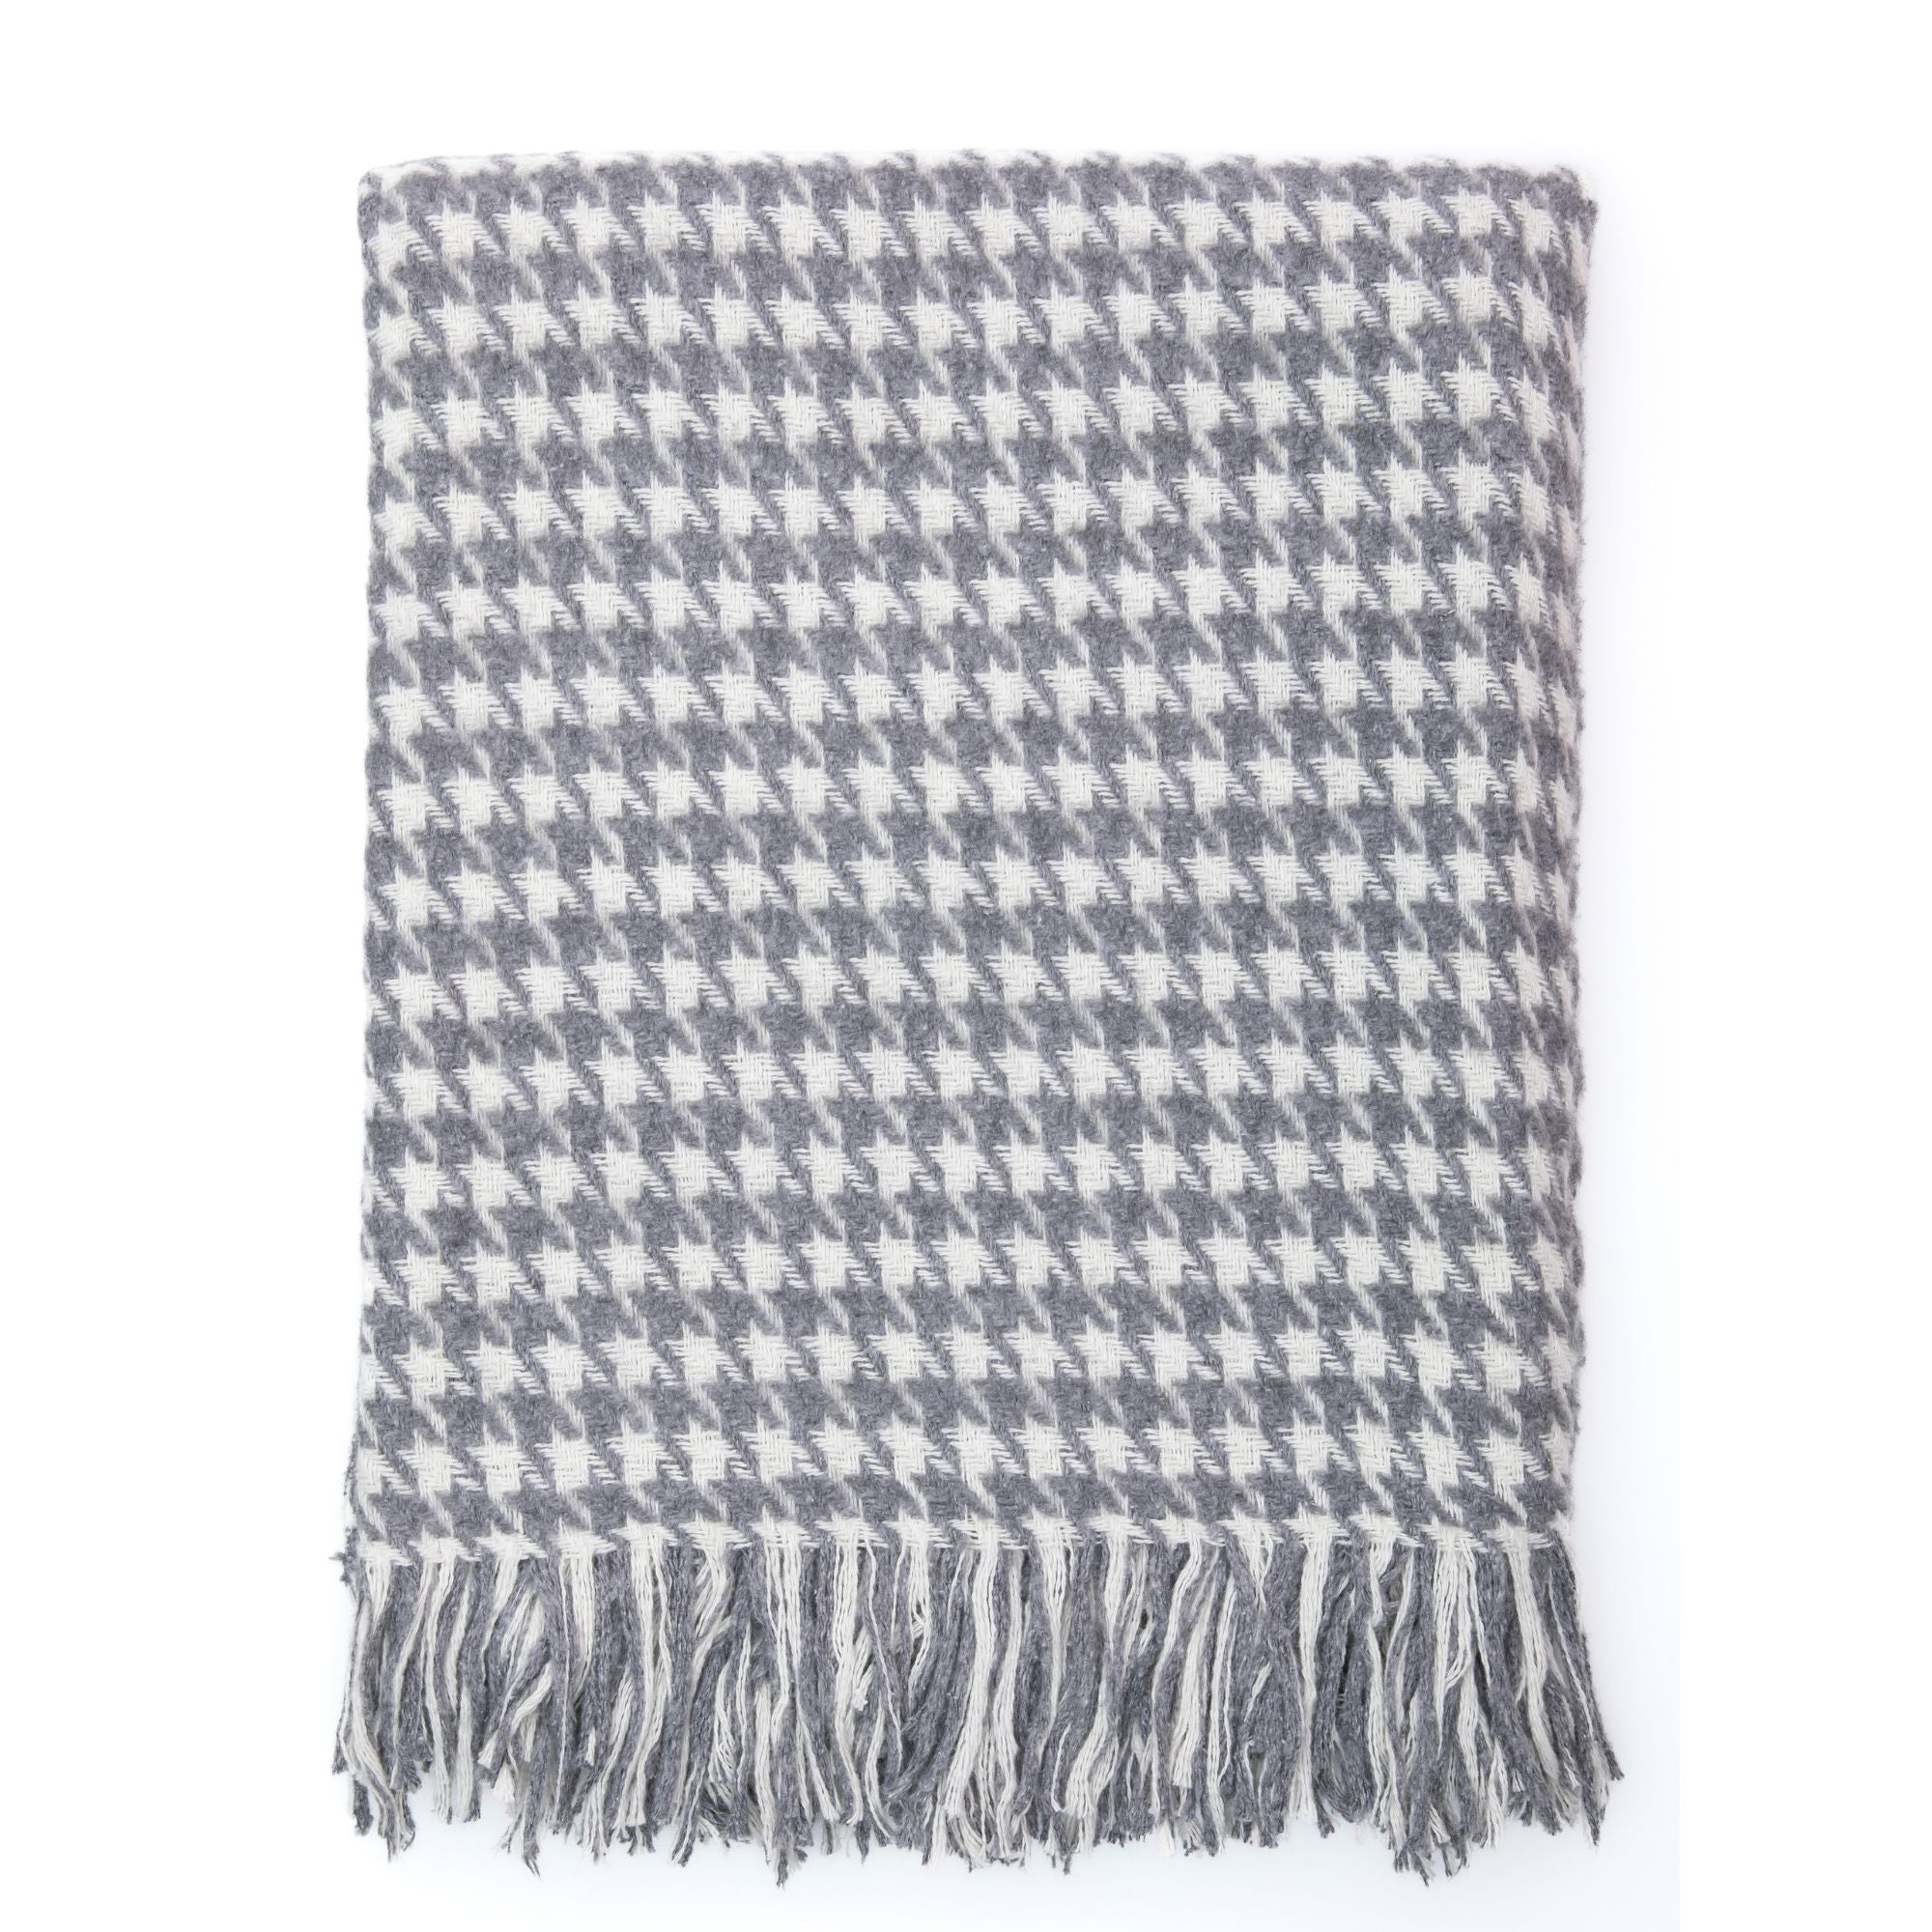 Trimita | Grey Houndstooth Luxury Throw Blanket displayed against a pure white background, emphasizing its traditional craftsmanship.